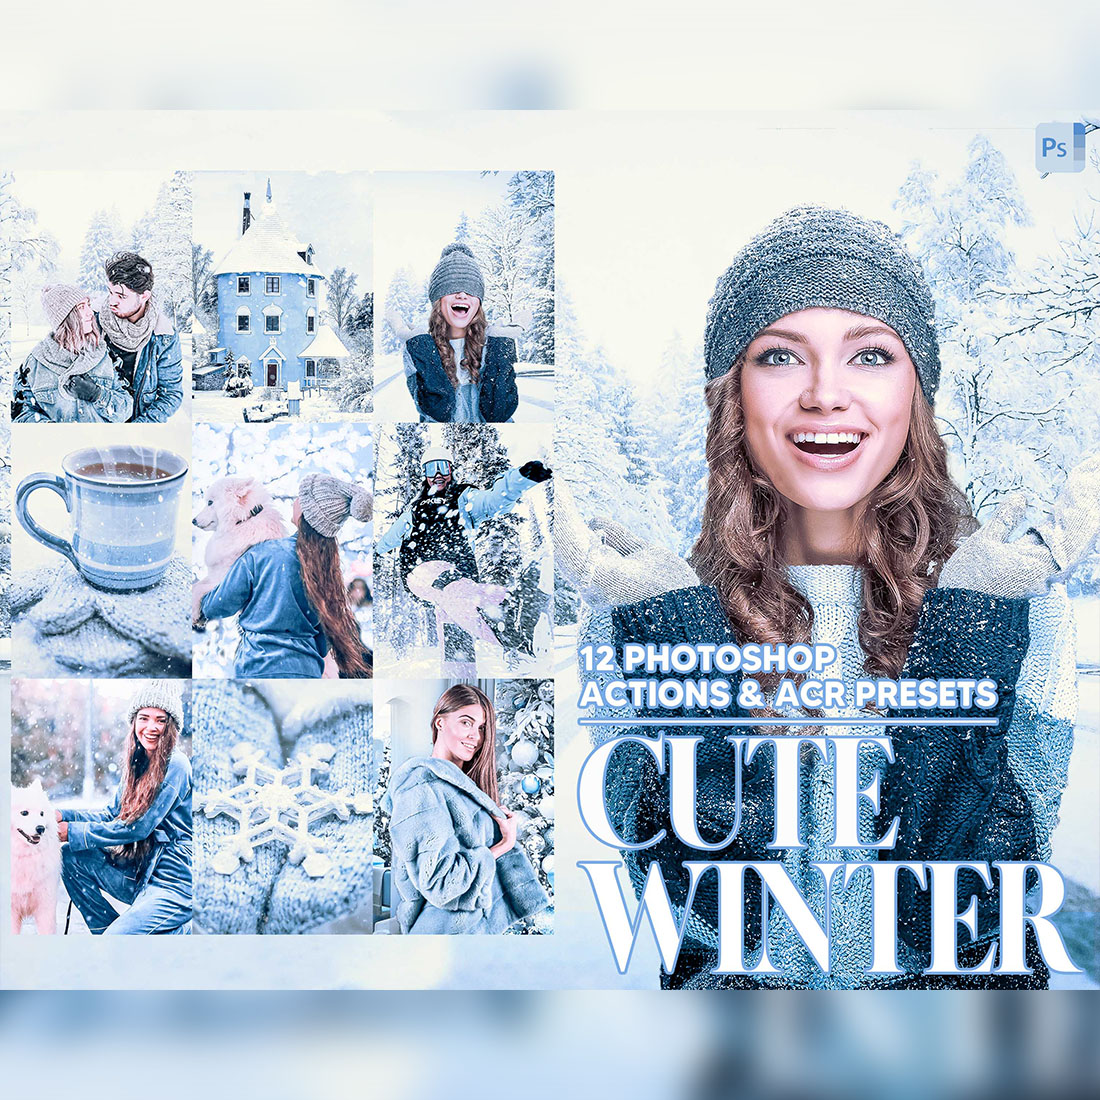 12 Photoshop Actions, Cute Winter Ps Action, Snow ACR Preset, Christmas Ps Filter, Atn Portrait And Lifestyle Theme For Instagram, Blogger cover image.